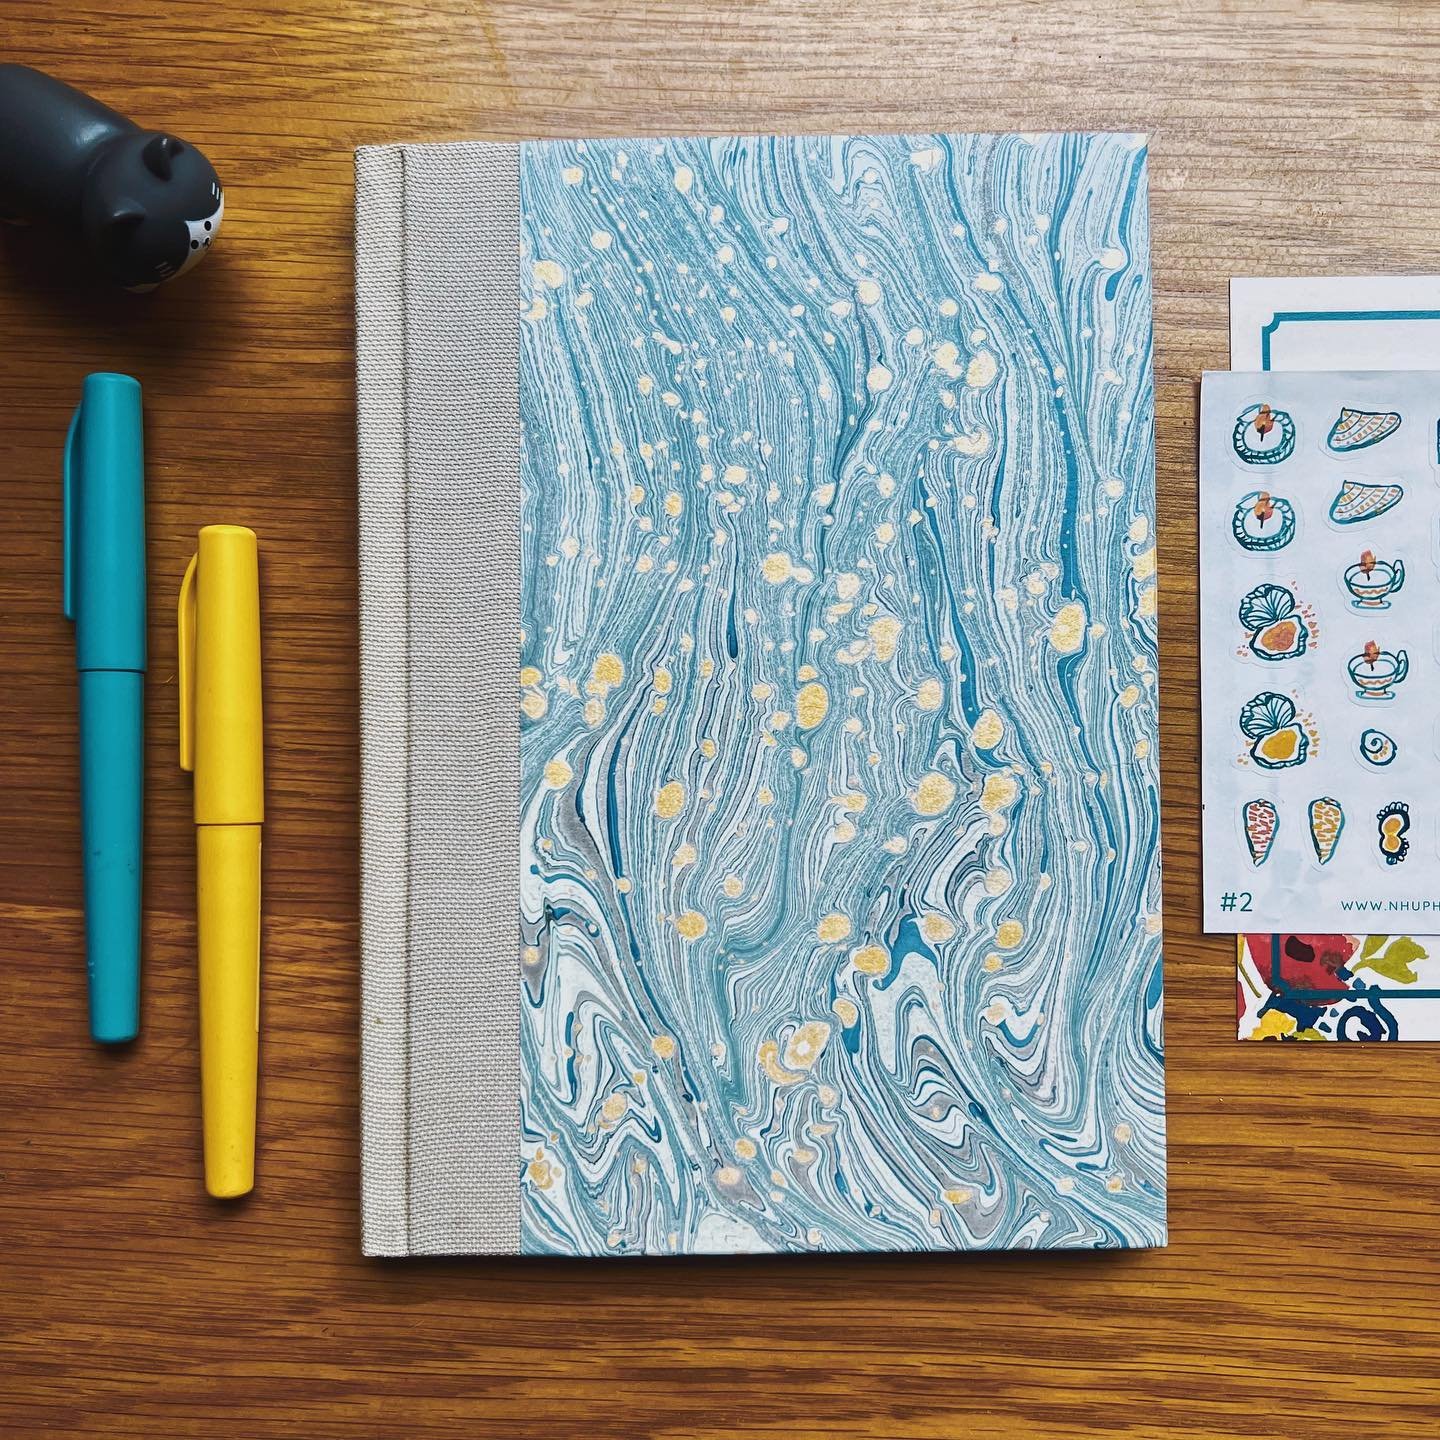 Notebook with water marbling cover by @nhupham.art ✨
She was so kind to produce this pattern upon request, and even experimented a few variations for me to choose from. The water marbling looks absolutely gorgeous in real life, with pretty shimmering